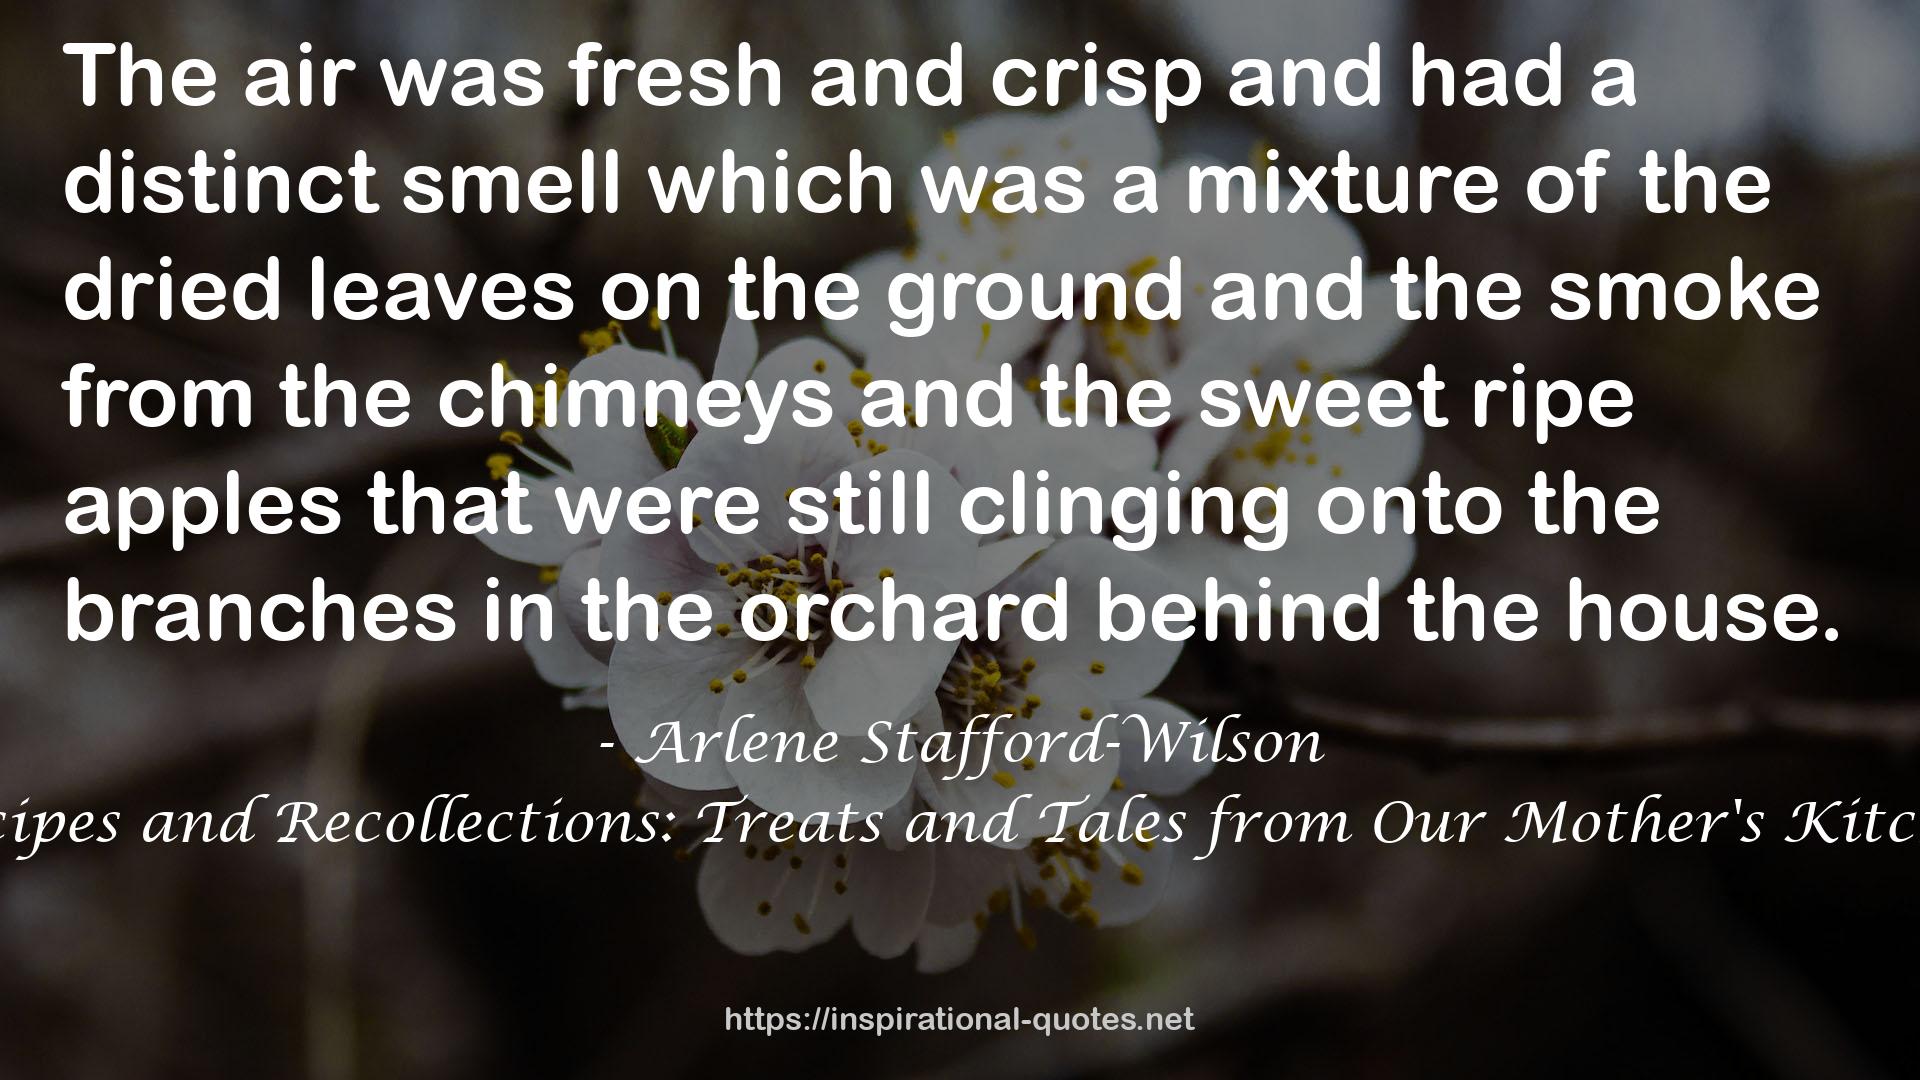 Recipes and Recollections: Treats and Tales from Our Mother's Kitchen QUOTES